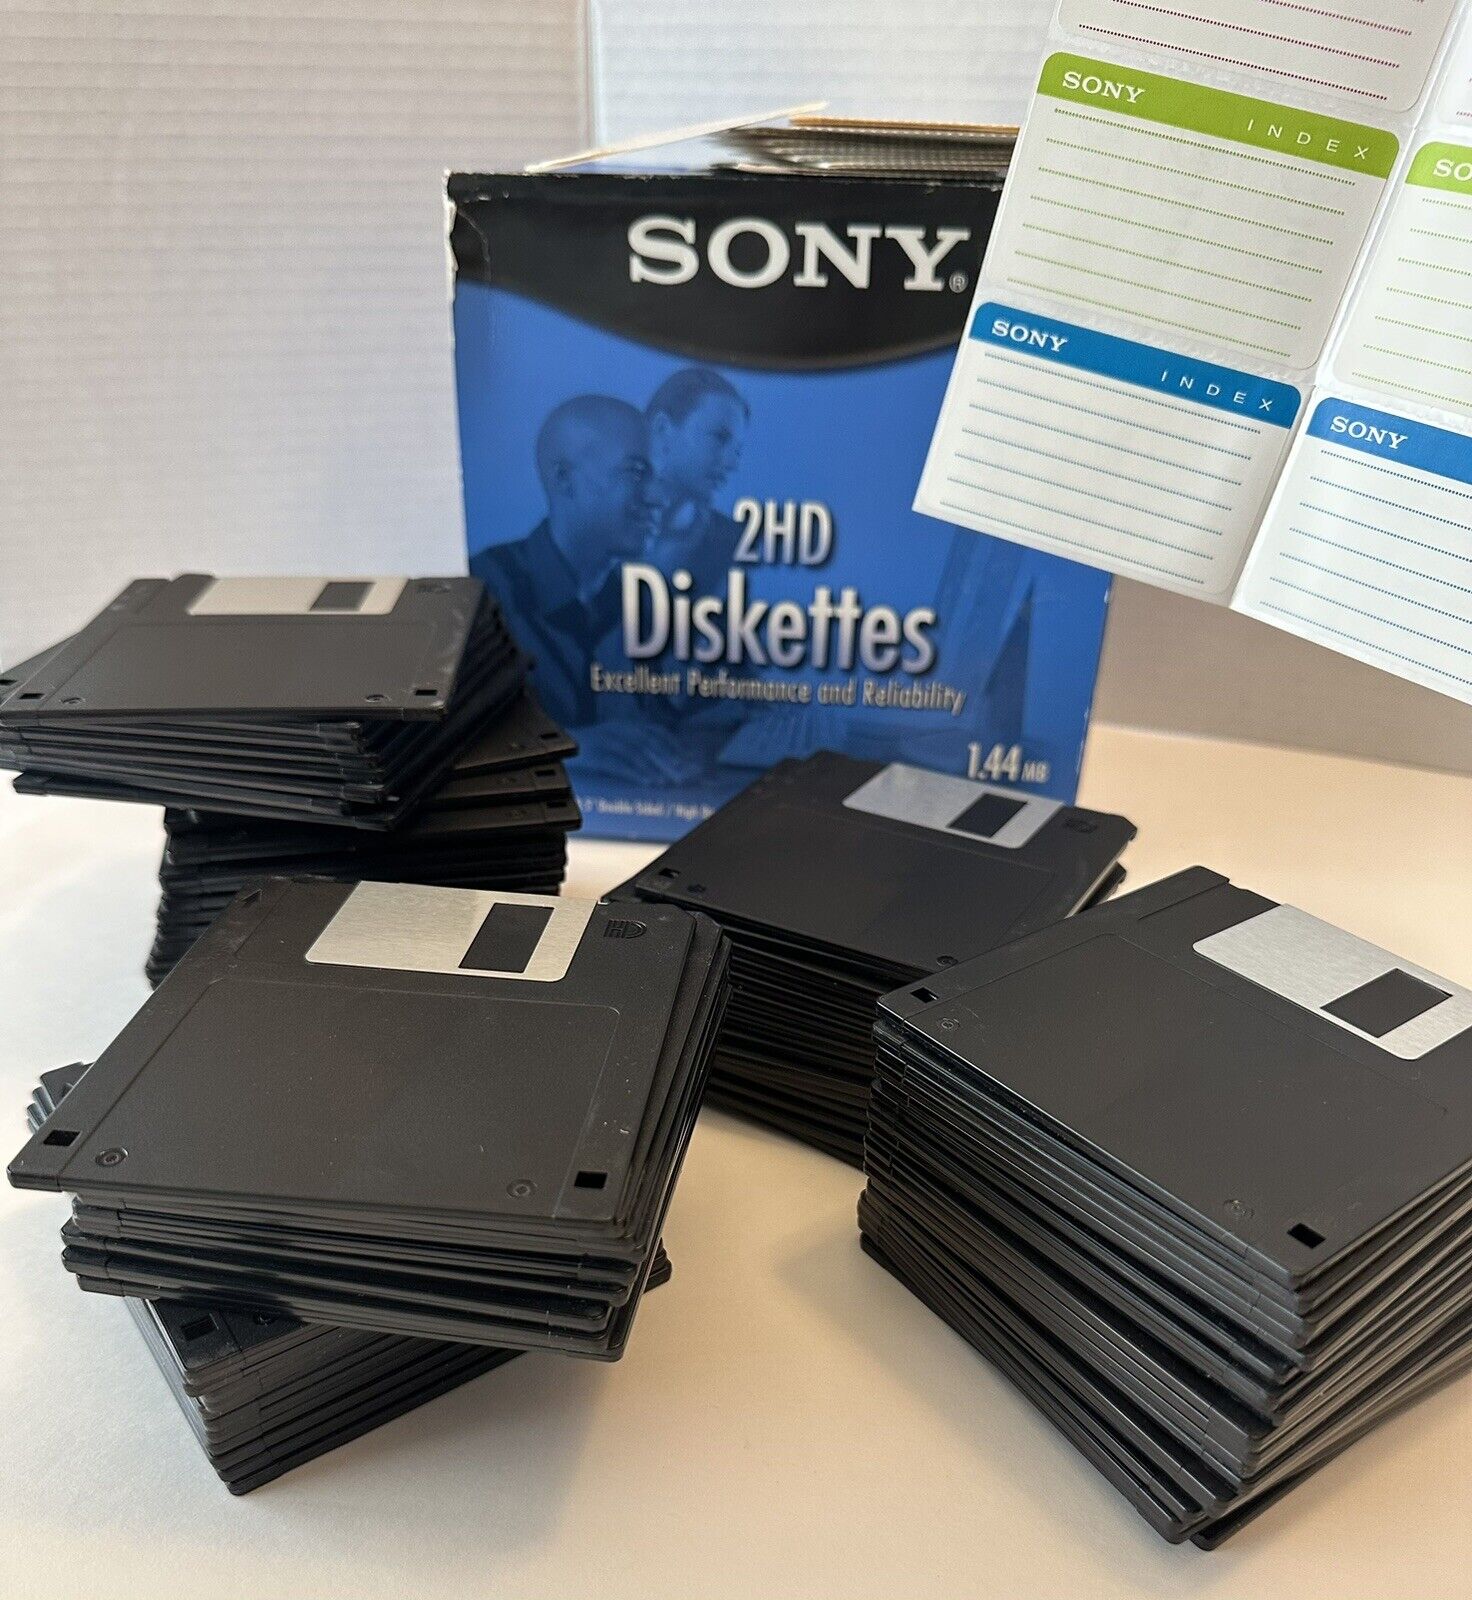 80 Sony 2HD Diskettes IBM formatted 1.44 MB 3.5